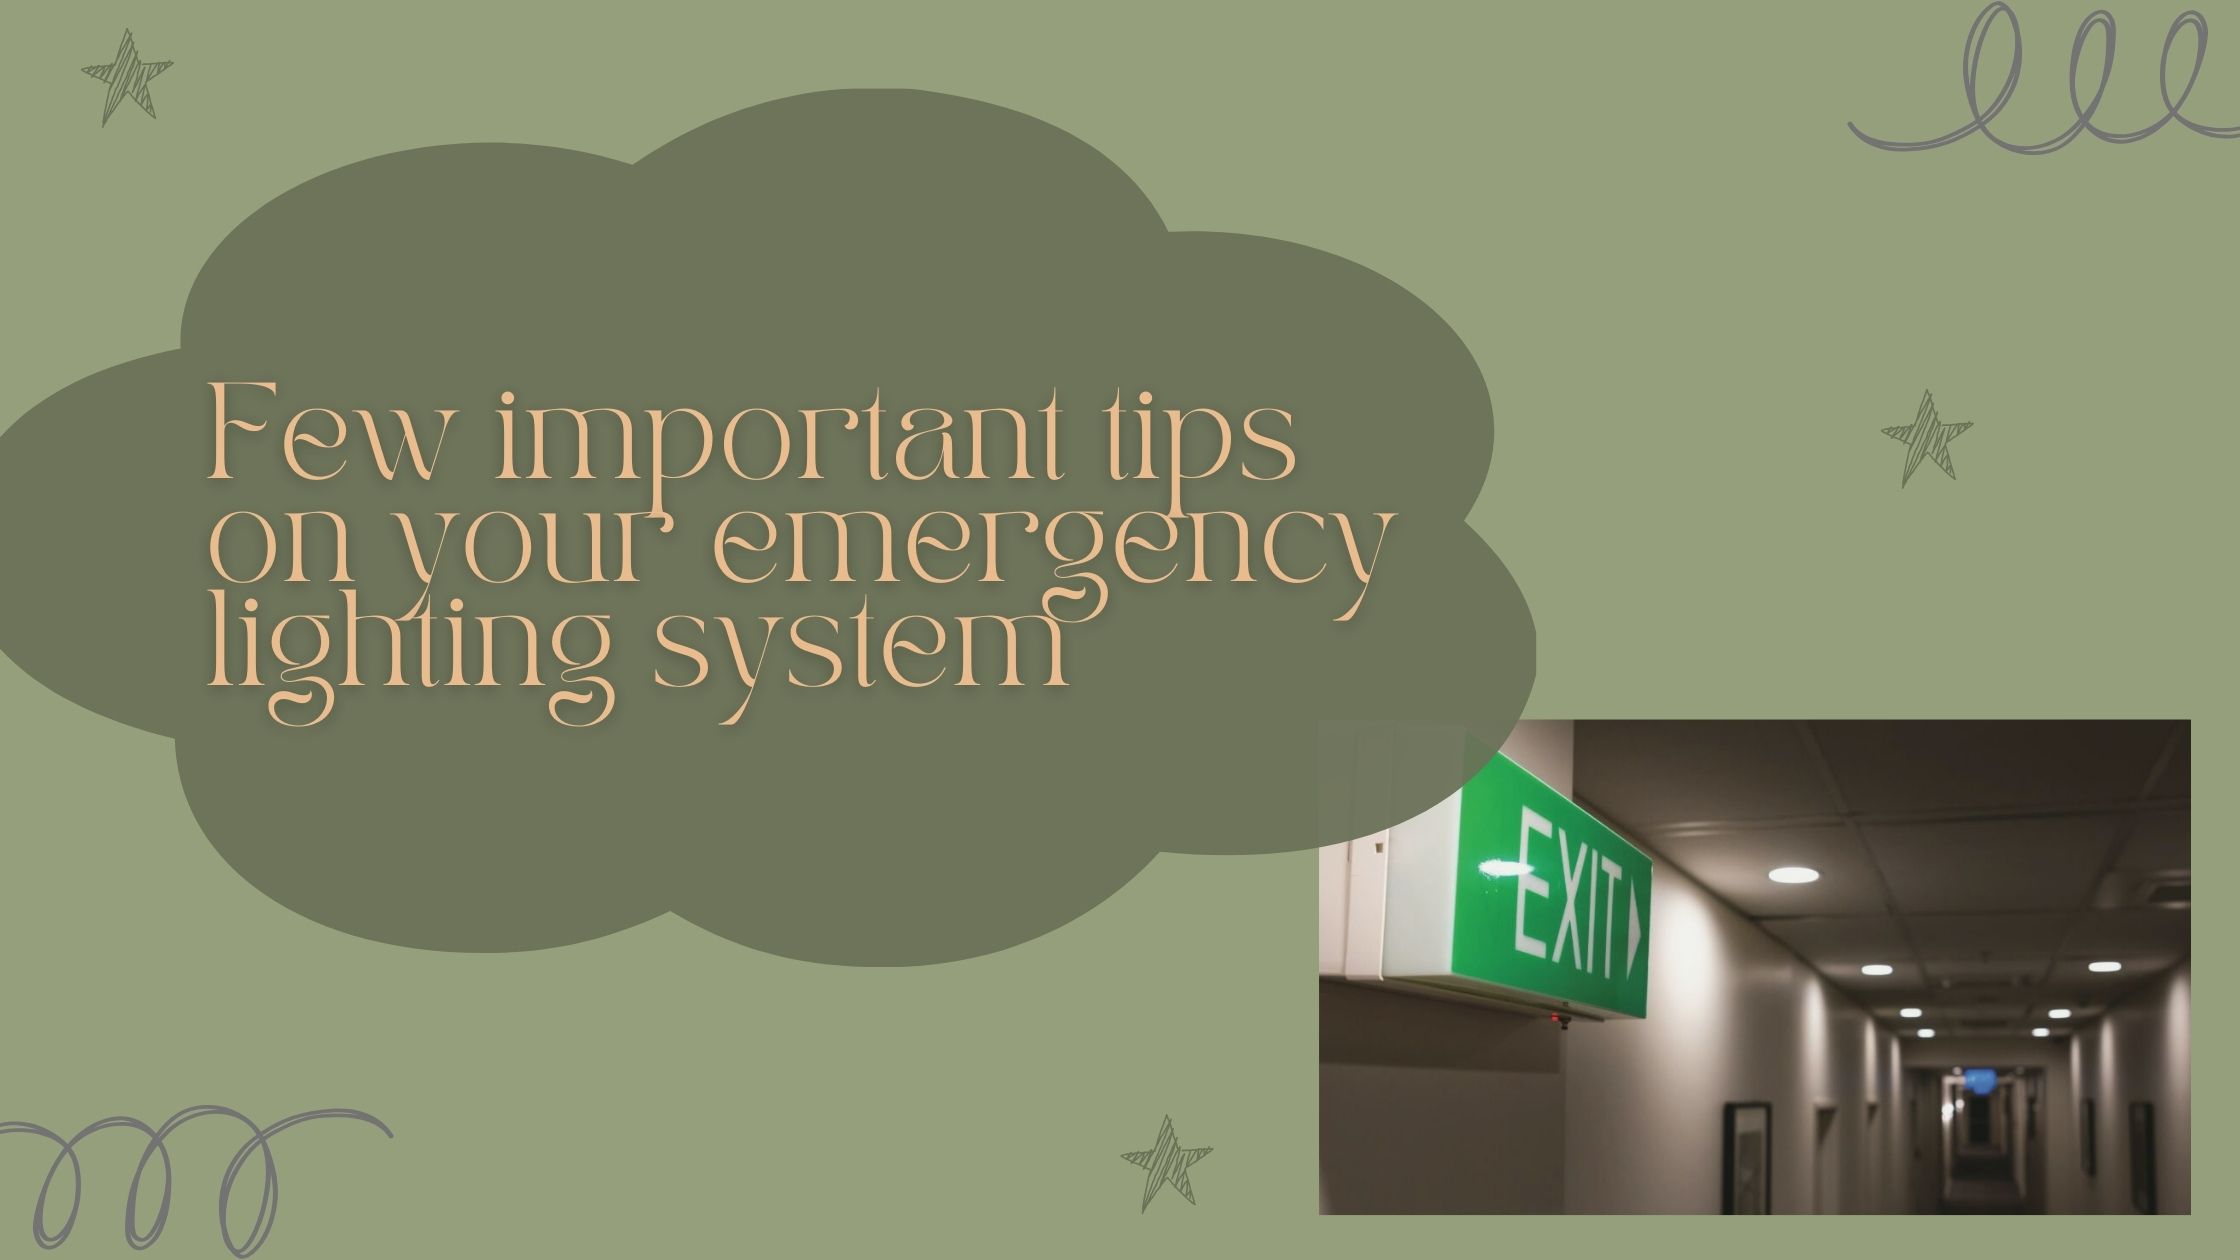 Few important tips on your emergency lighting system